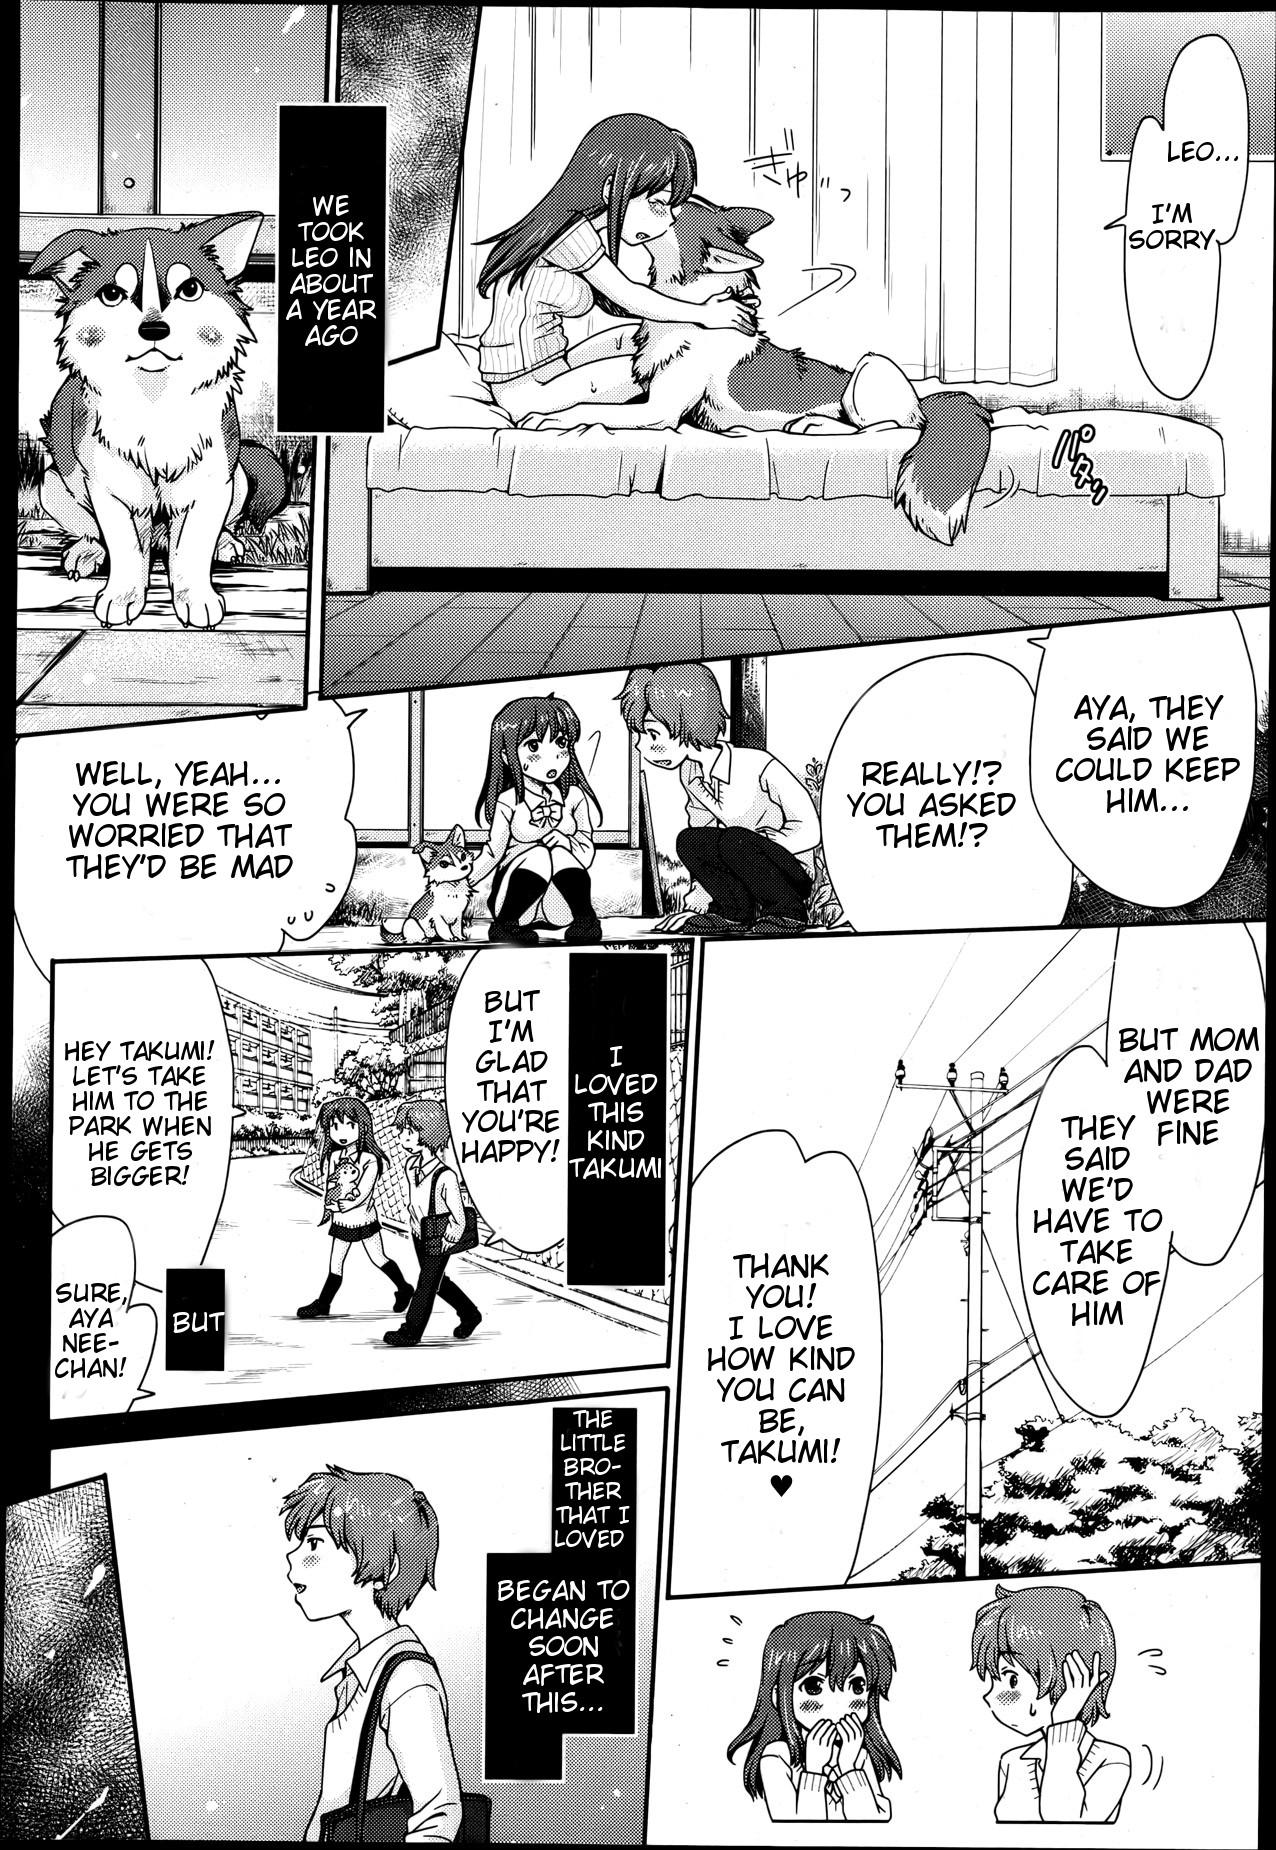 Girls Hentai Kyoudai to Inu | Pervert Siblings and Their Dog Huge Cock - Page 2